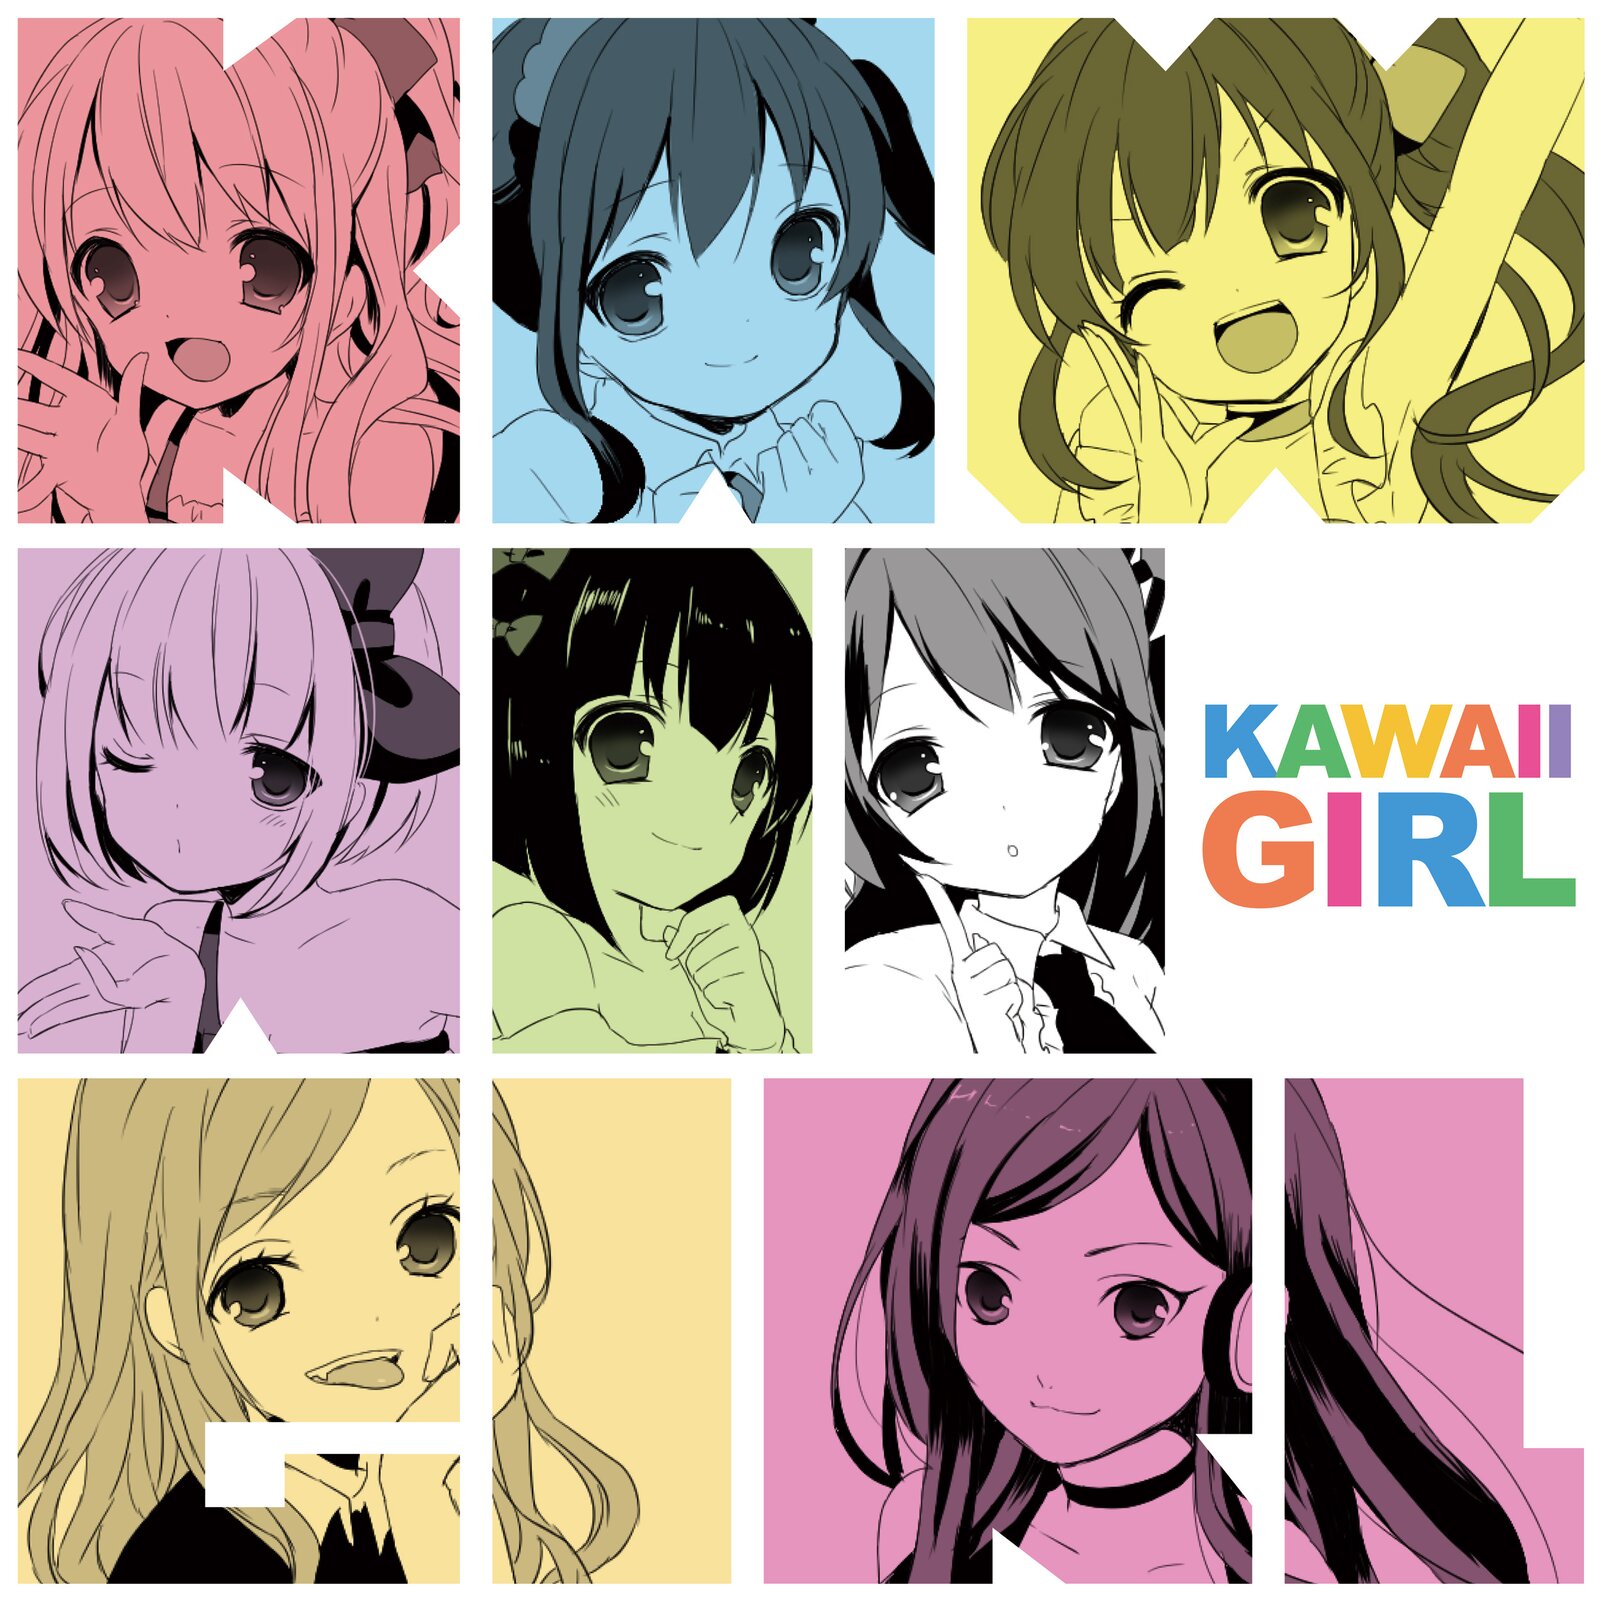 Kawaii anime and kawaii - Kawaii anime and kawaii song